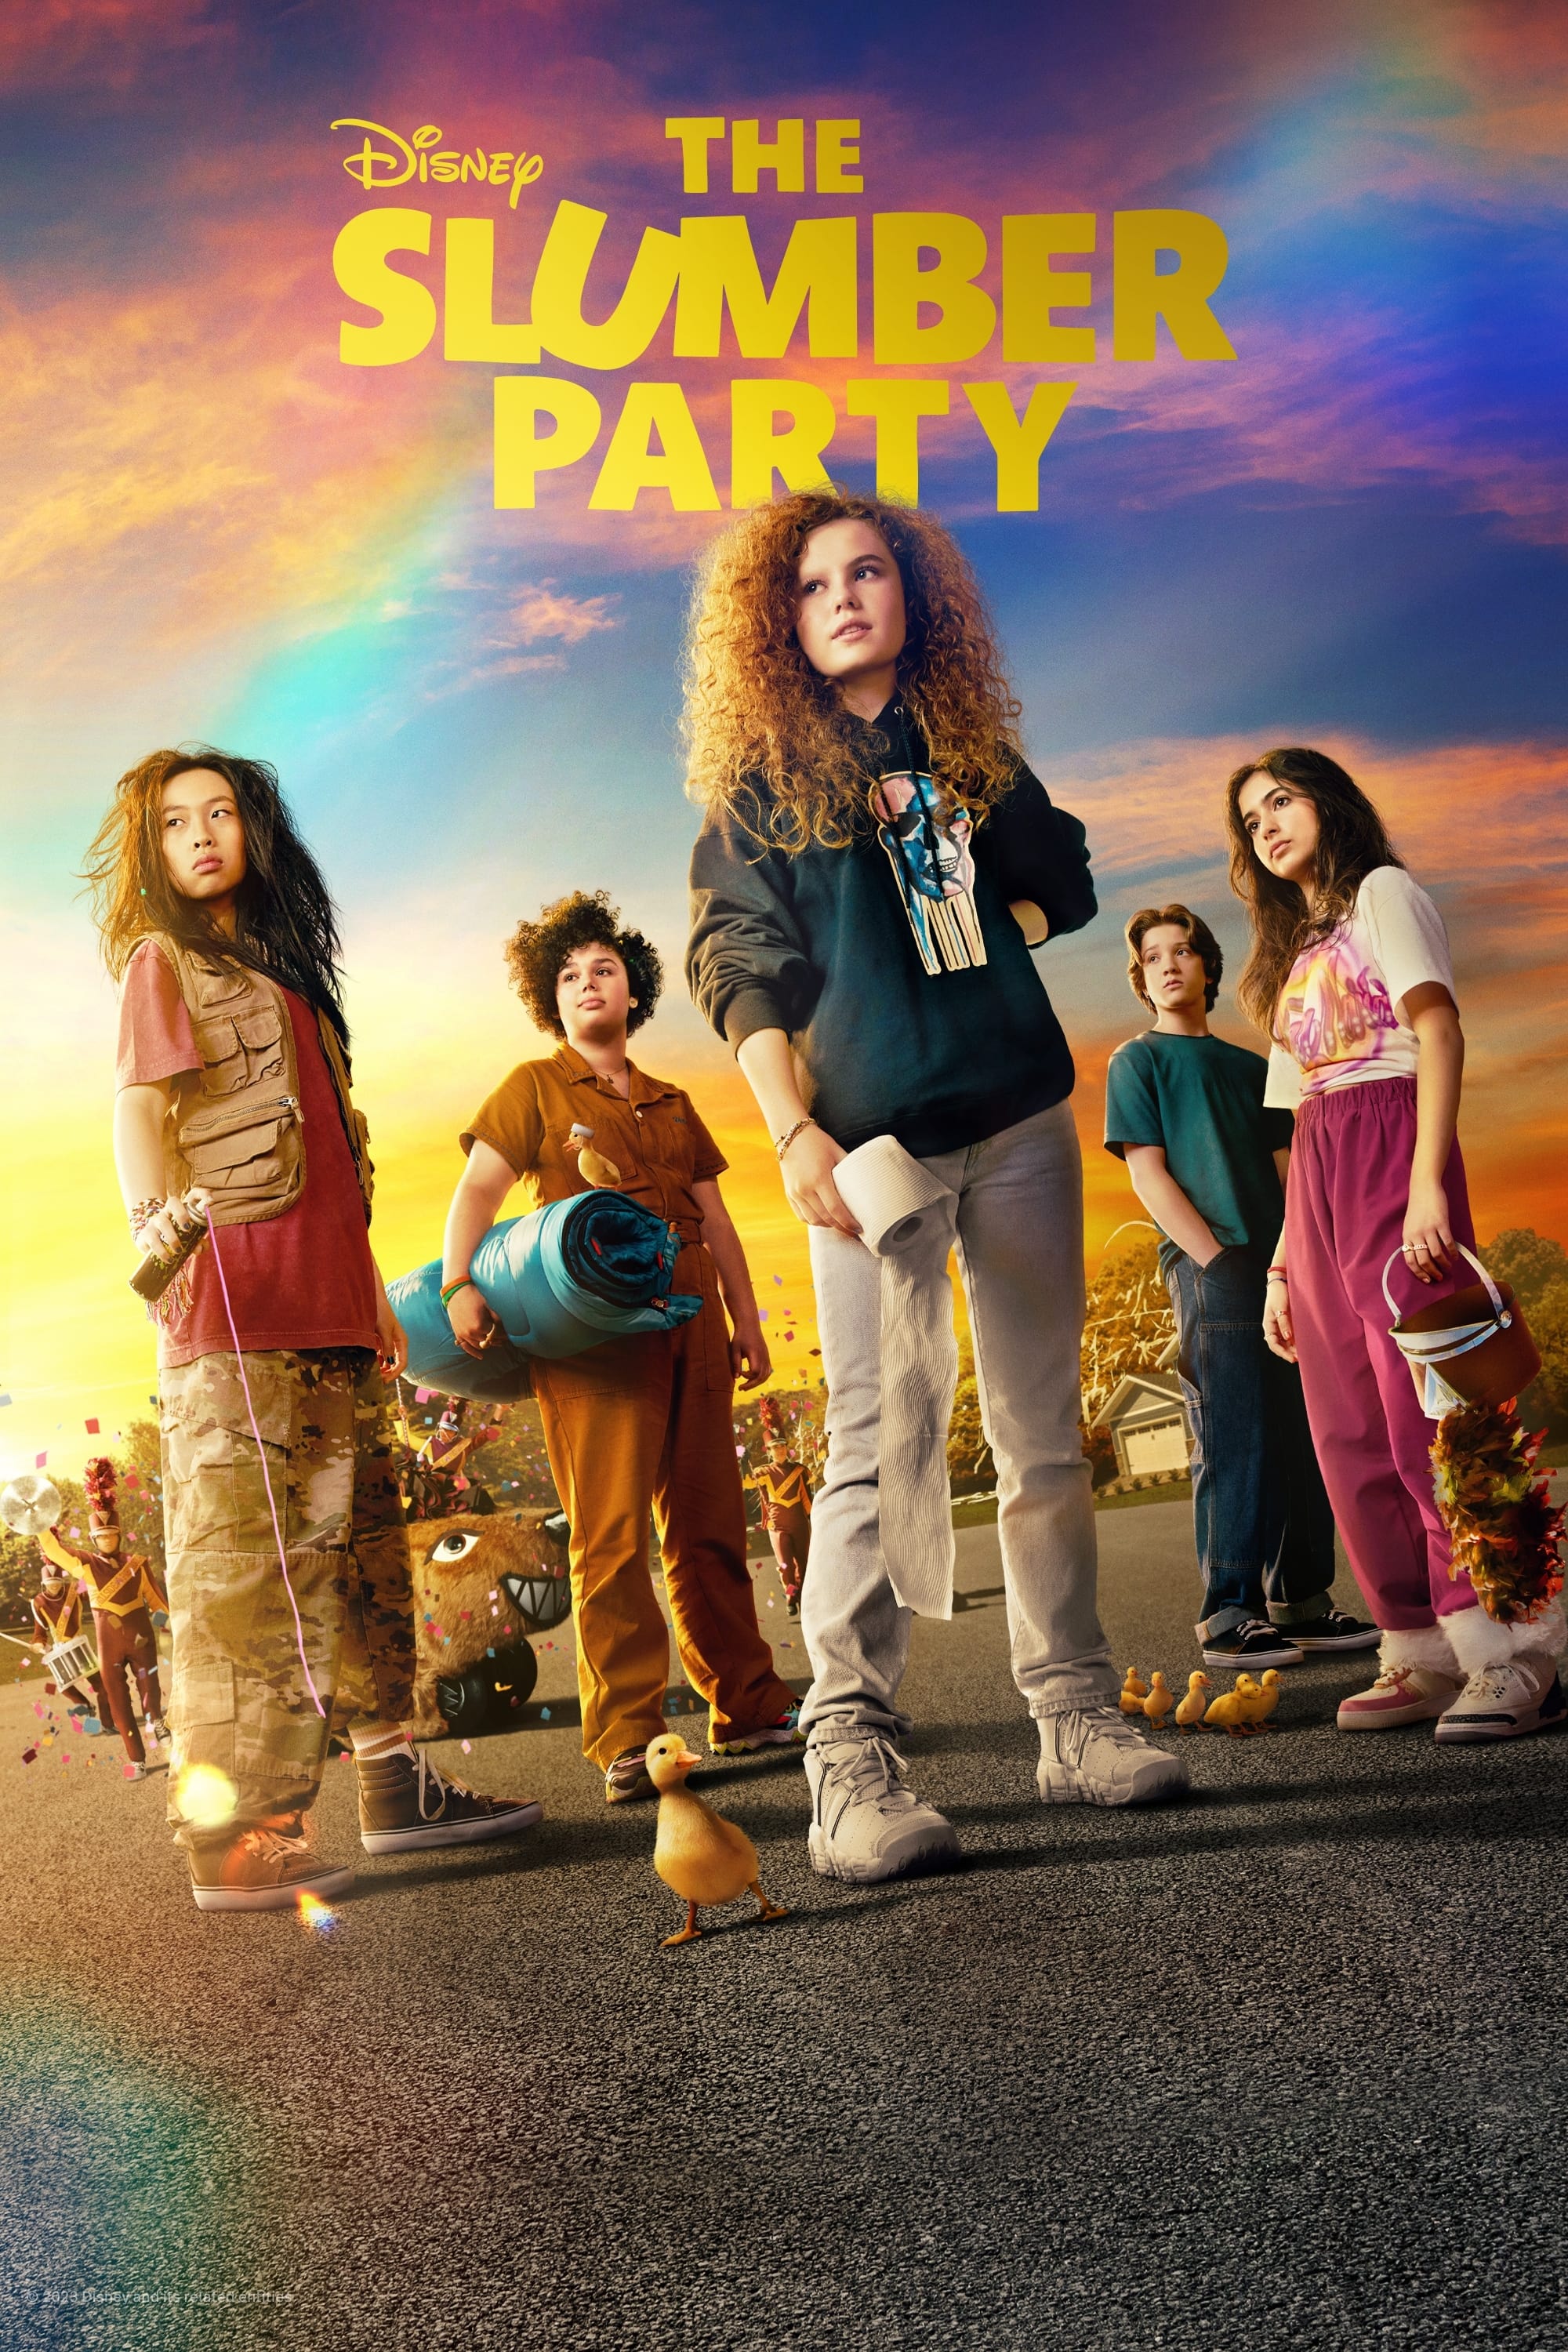 [WATCH 32+] The Slumber Party (2023) FULL MOVIE ONLINE FREE ENGLISH/Dub/SUB Comedy STREAMINGS ������ Movie Poster